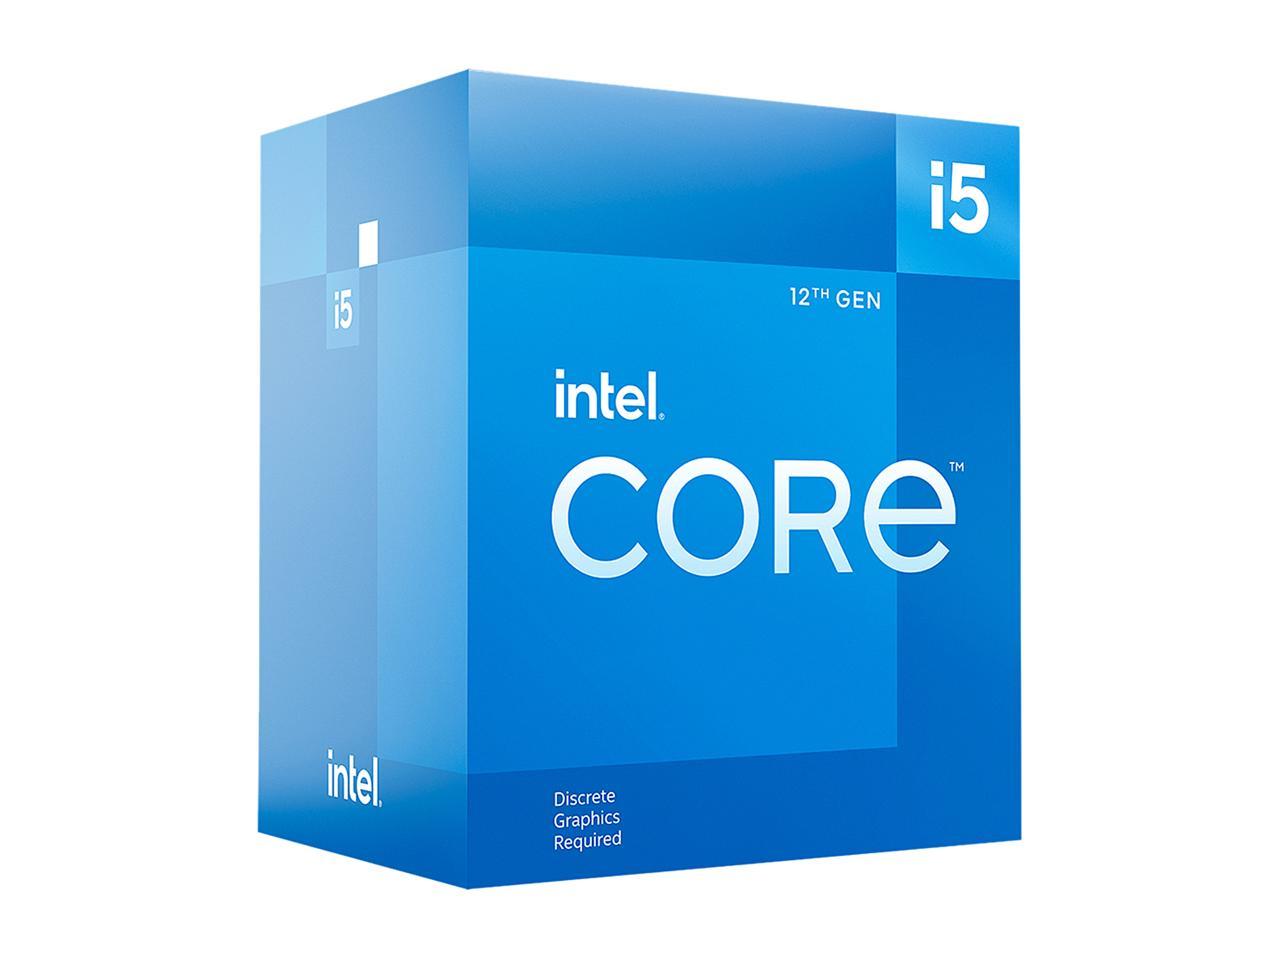 Intel Core i5-12400F 2.5 GHz 6-Core CPU $154.98 with promotion code @Newegg